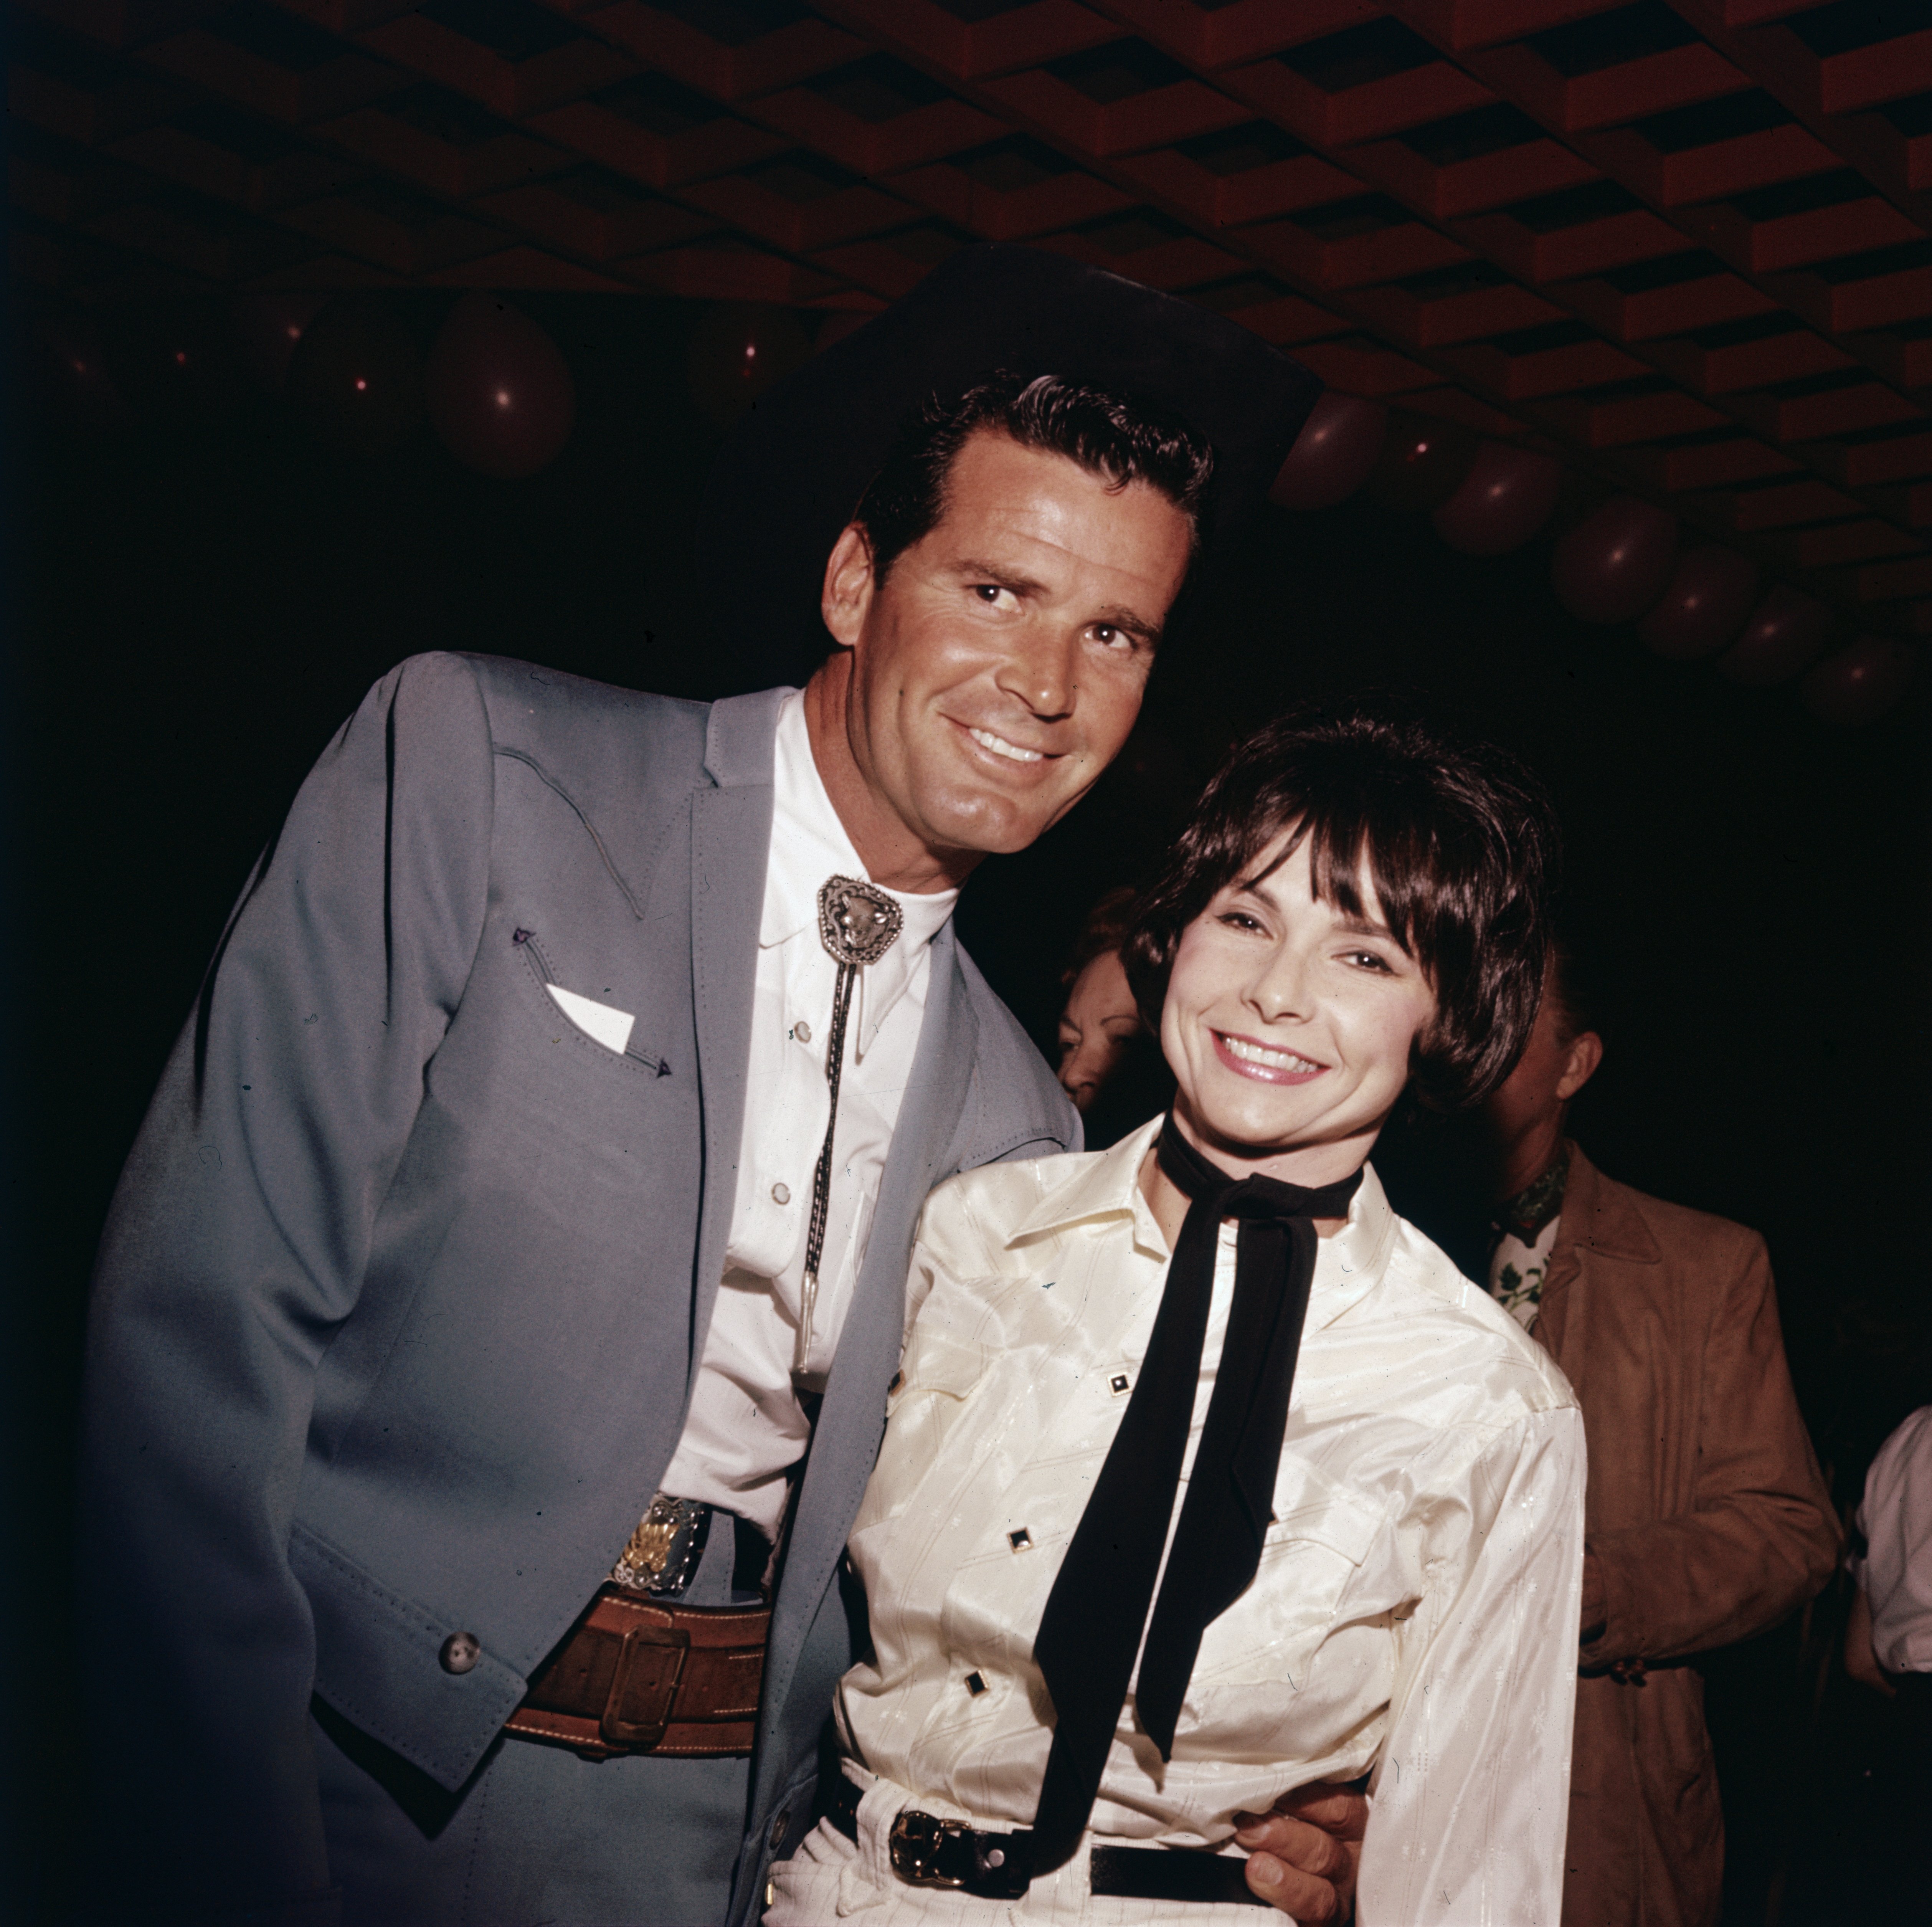 James Garner pictured posing with his wife, Lois Clarke during a party in the 1960s | Source: Getty Images